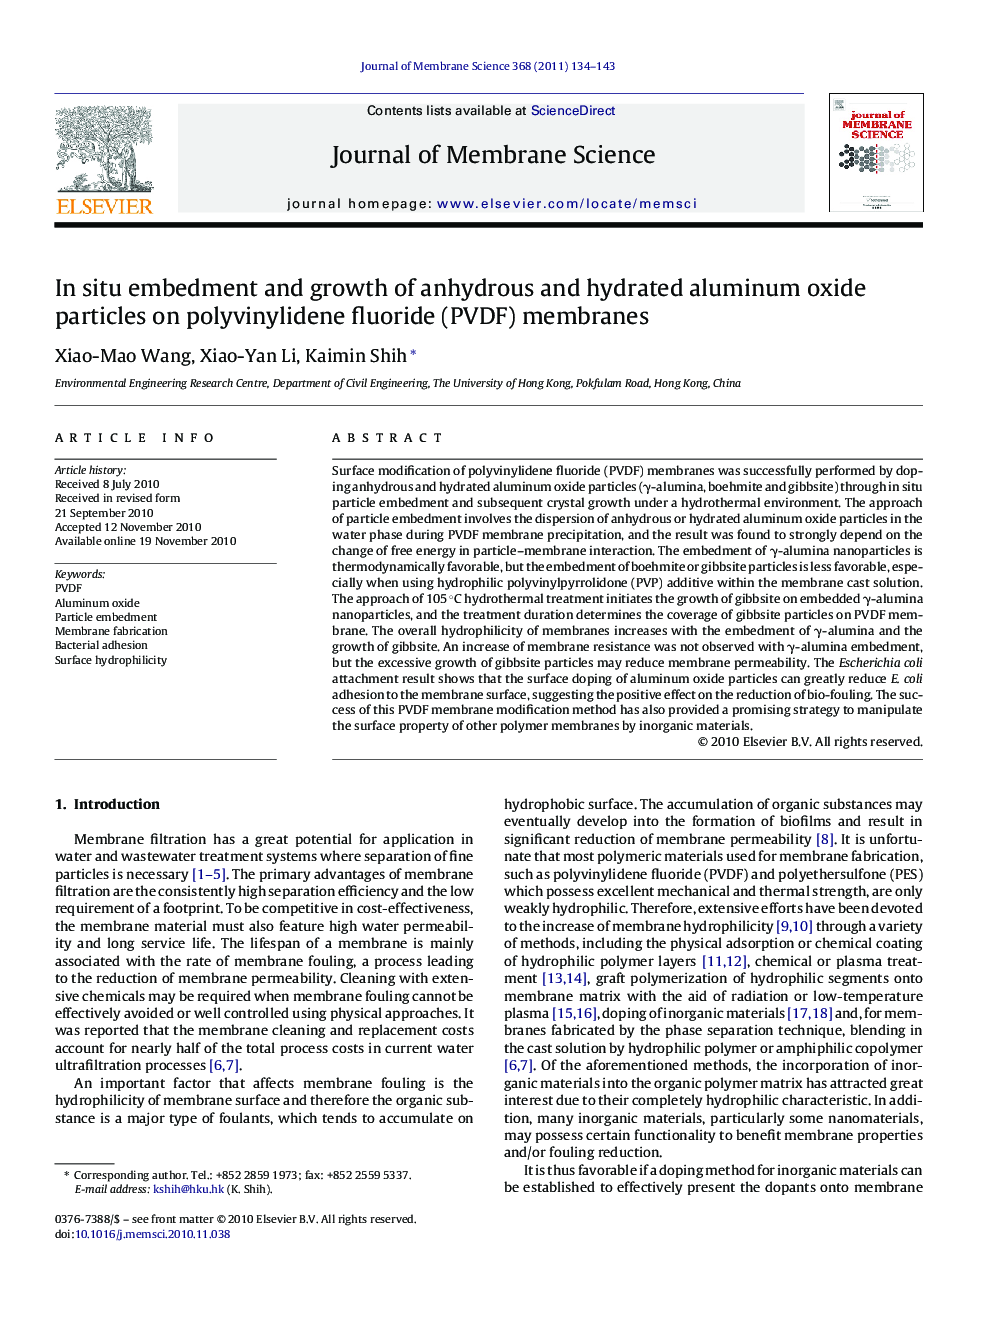 In situ embedment and growth of anhydrous and hydrated aluminum oxide particles on polyvinylidene fluoride (PVDF) membranes